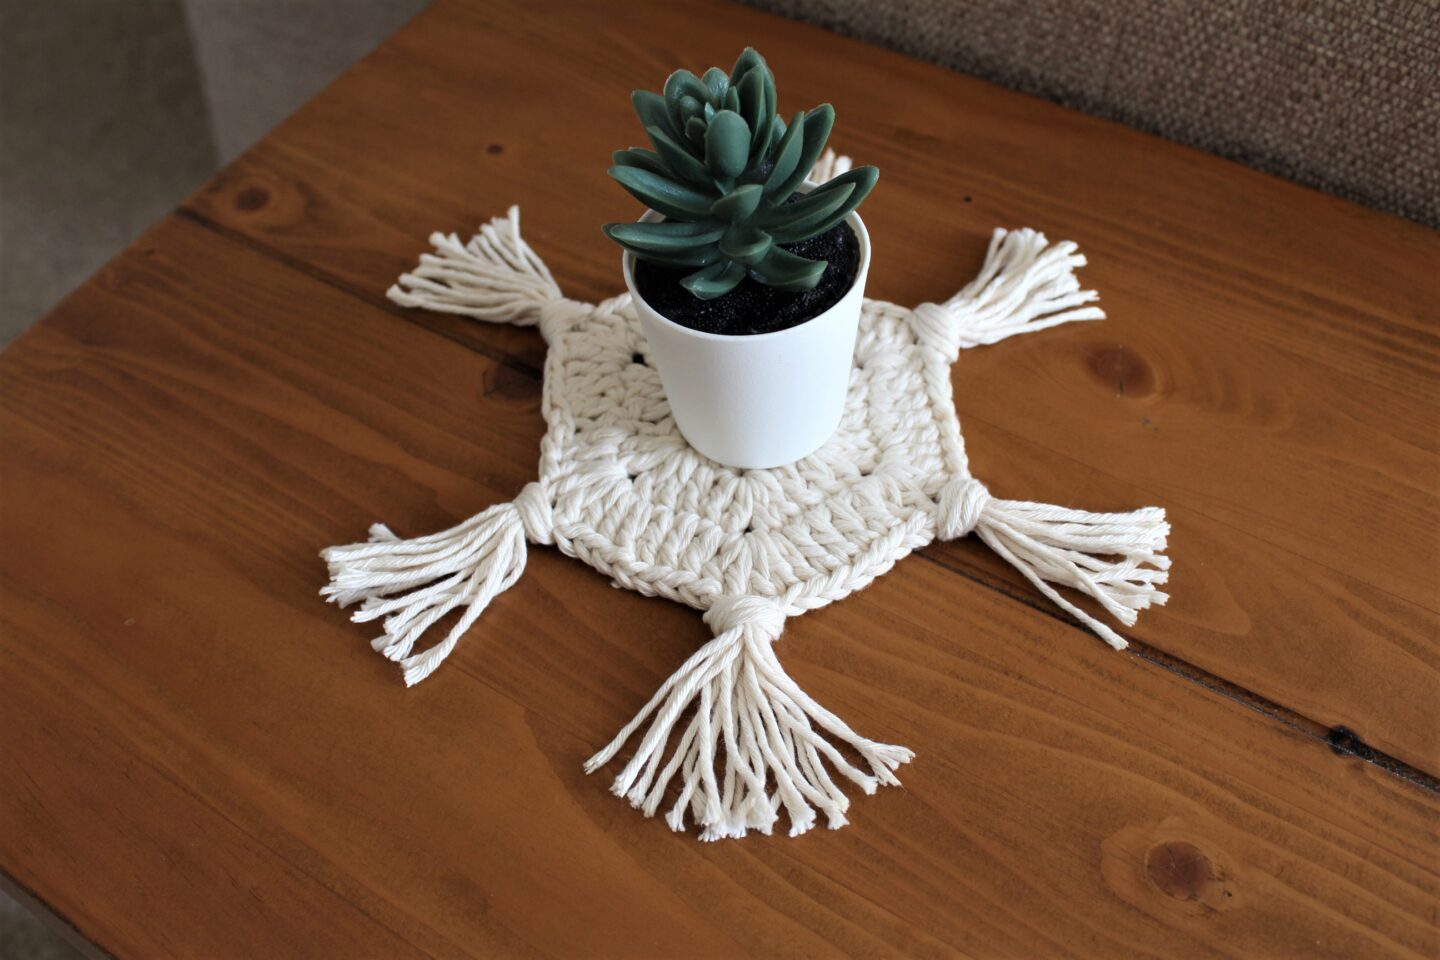 crochet hexagon coaster with a small plant on it.